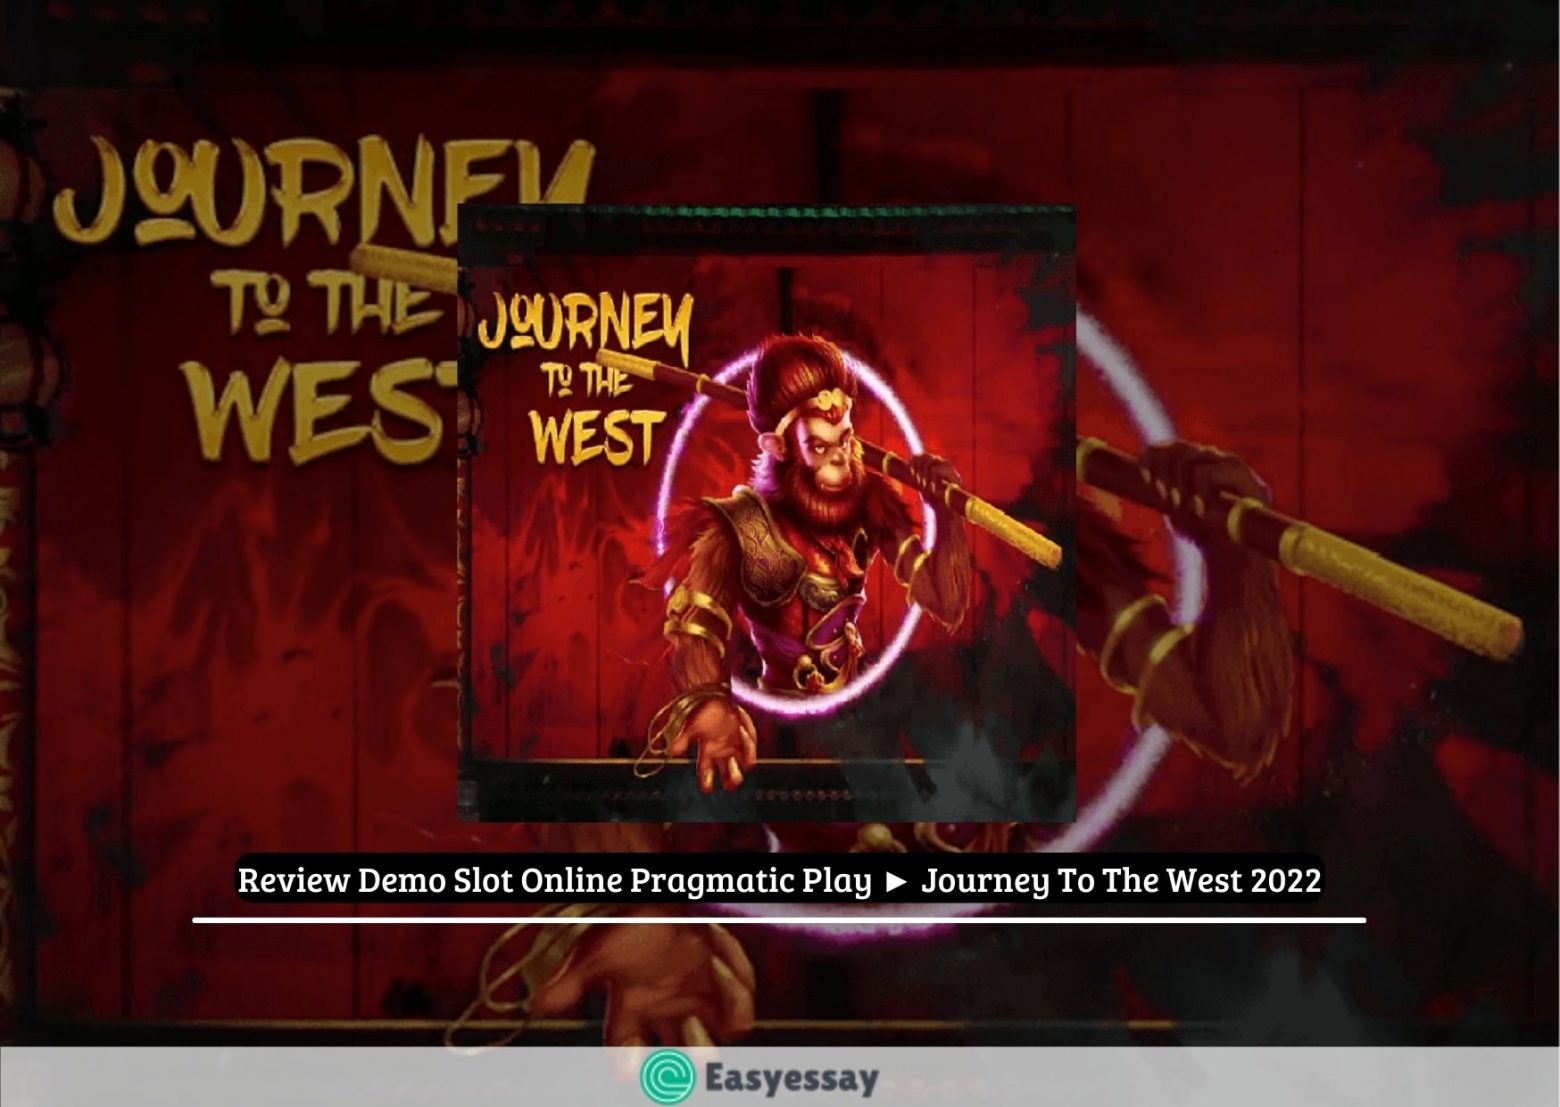 Review Demo Slot Online Pragmatic Play ► Journey To The West 2022